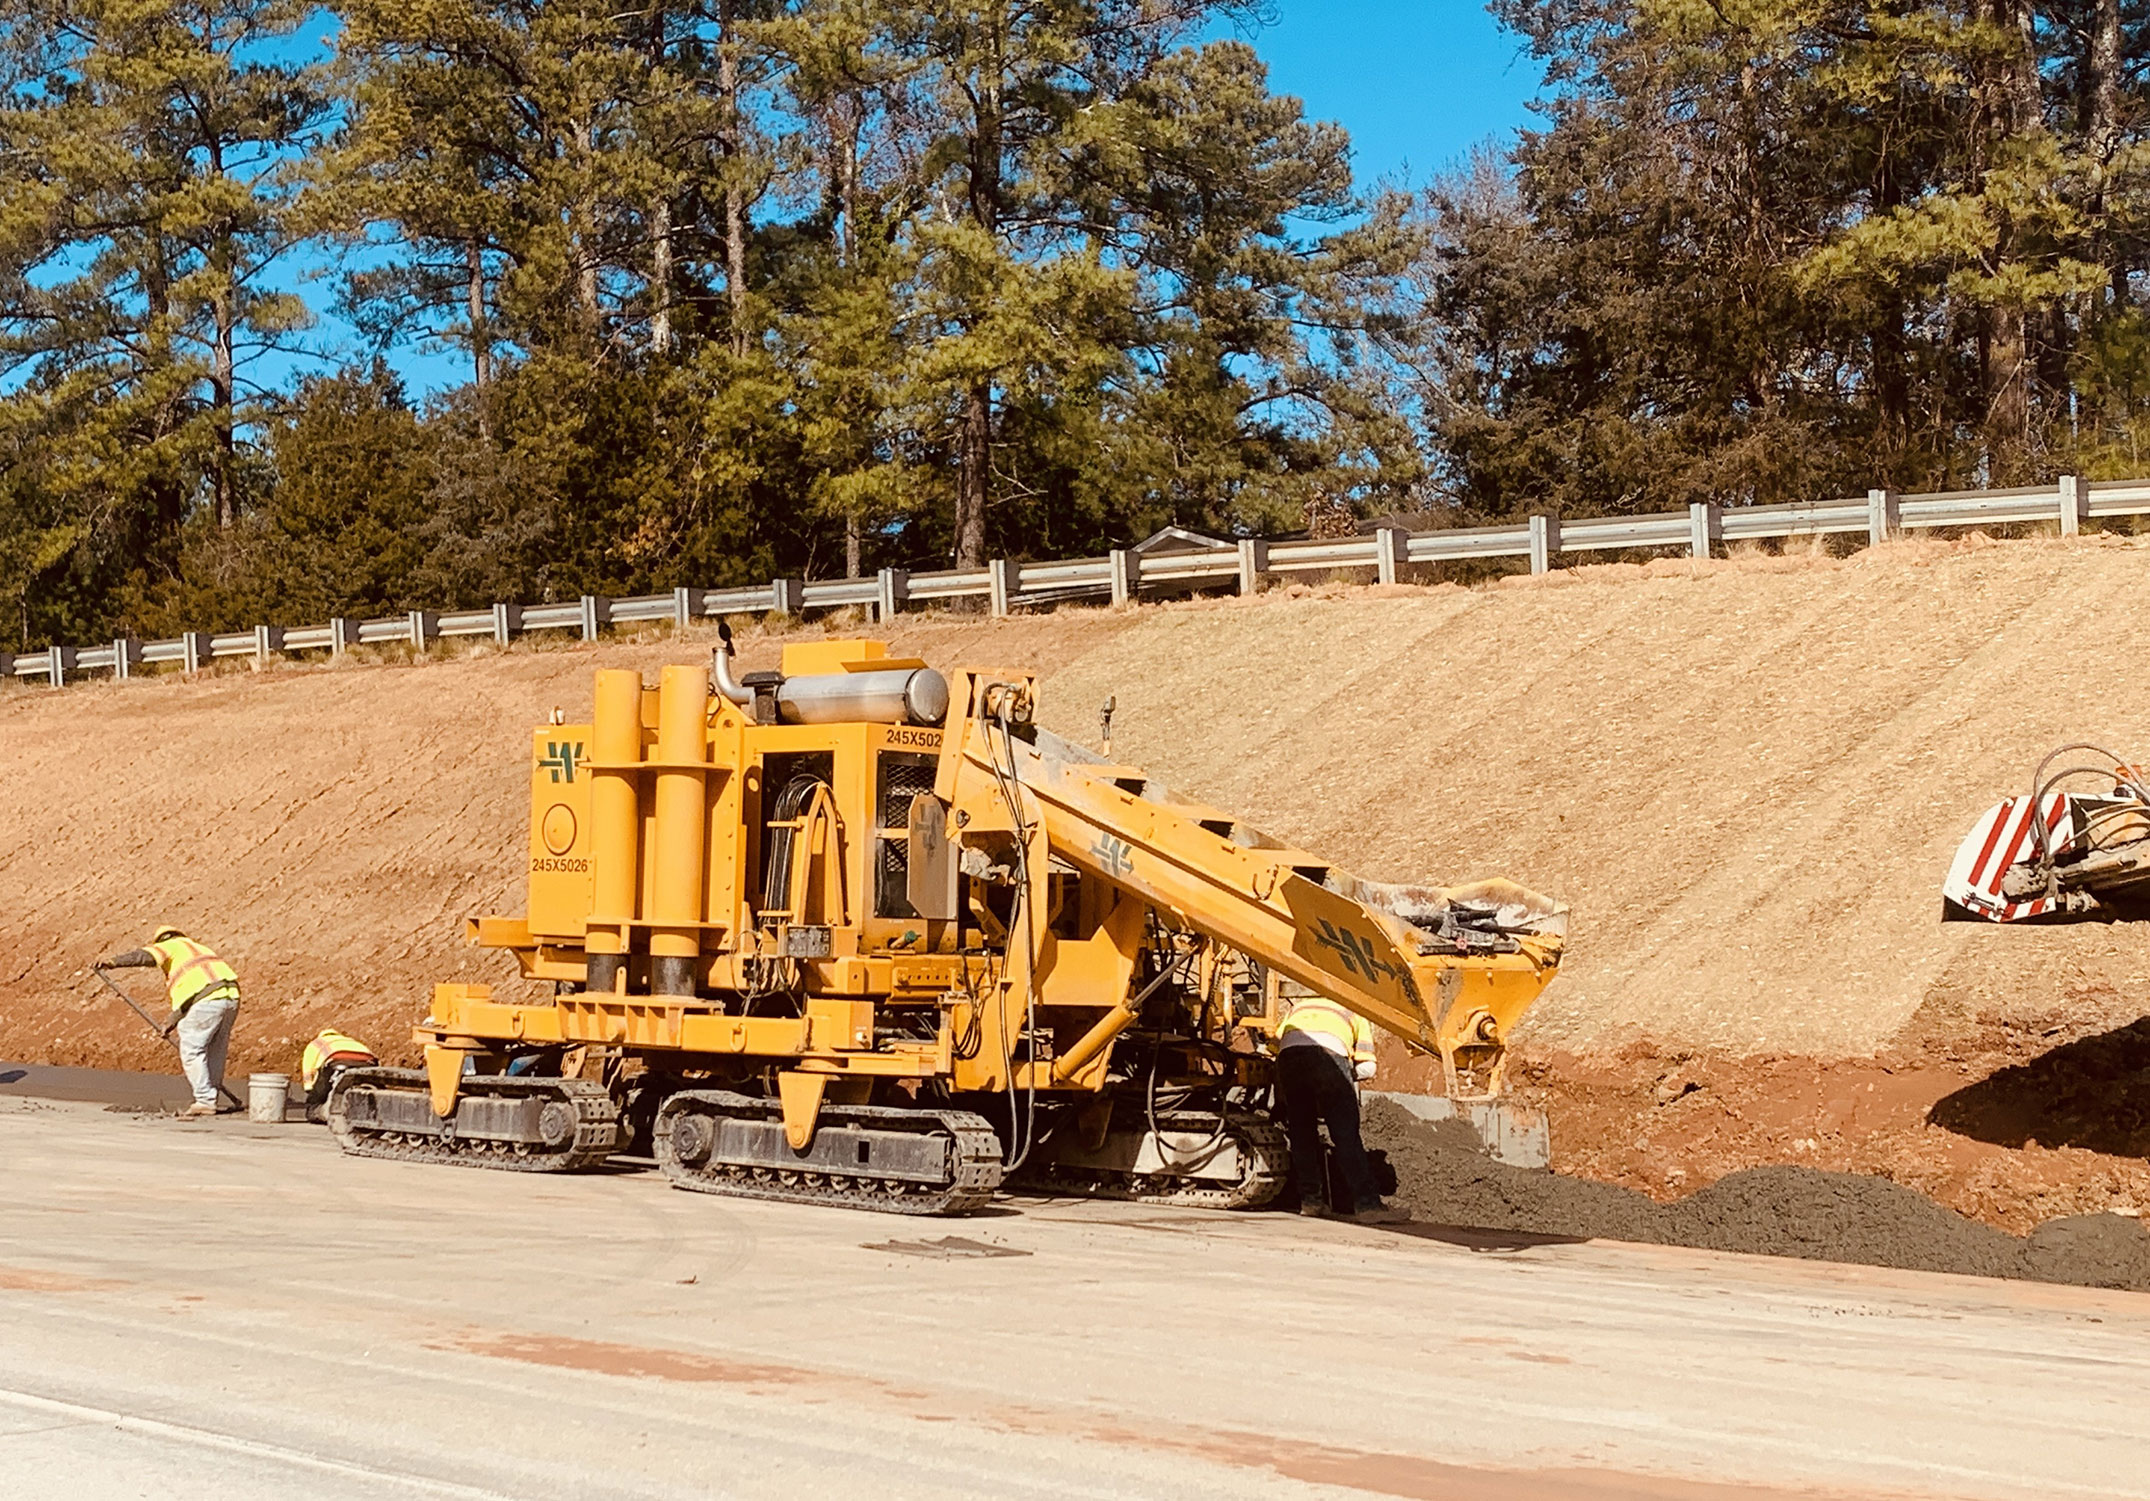 Concrete crews are placing the expressway gutter adjacent to the shoulder of the road.  The gutters will channel water from the roadway to an inlet or drainage ditch.